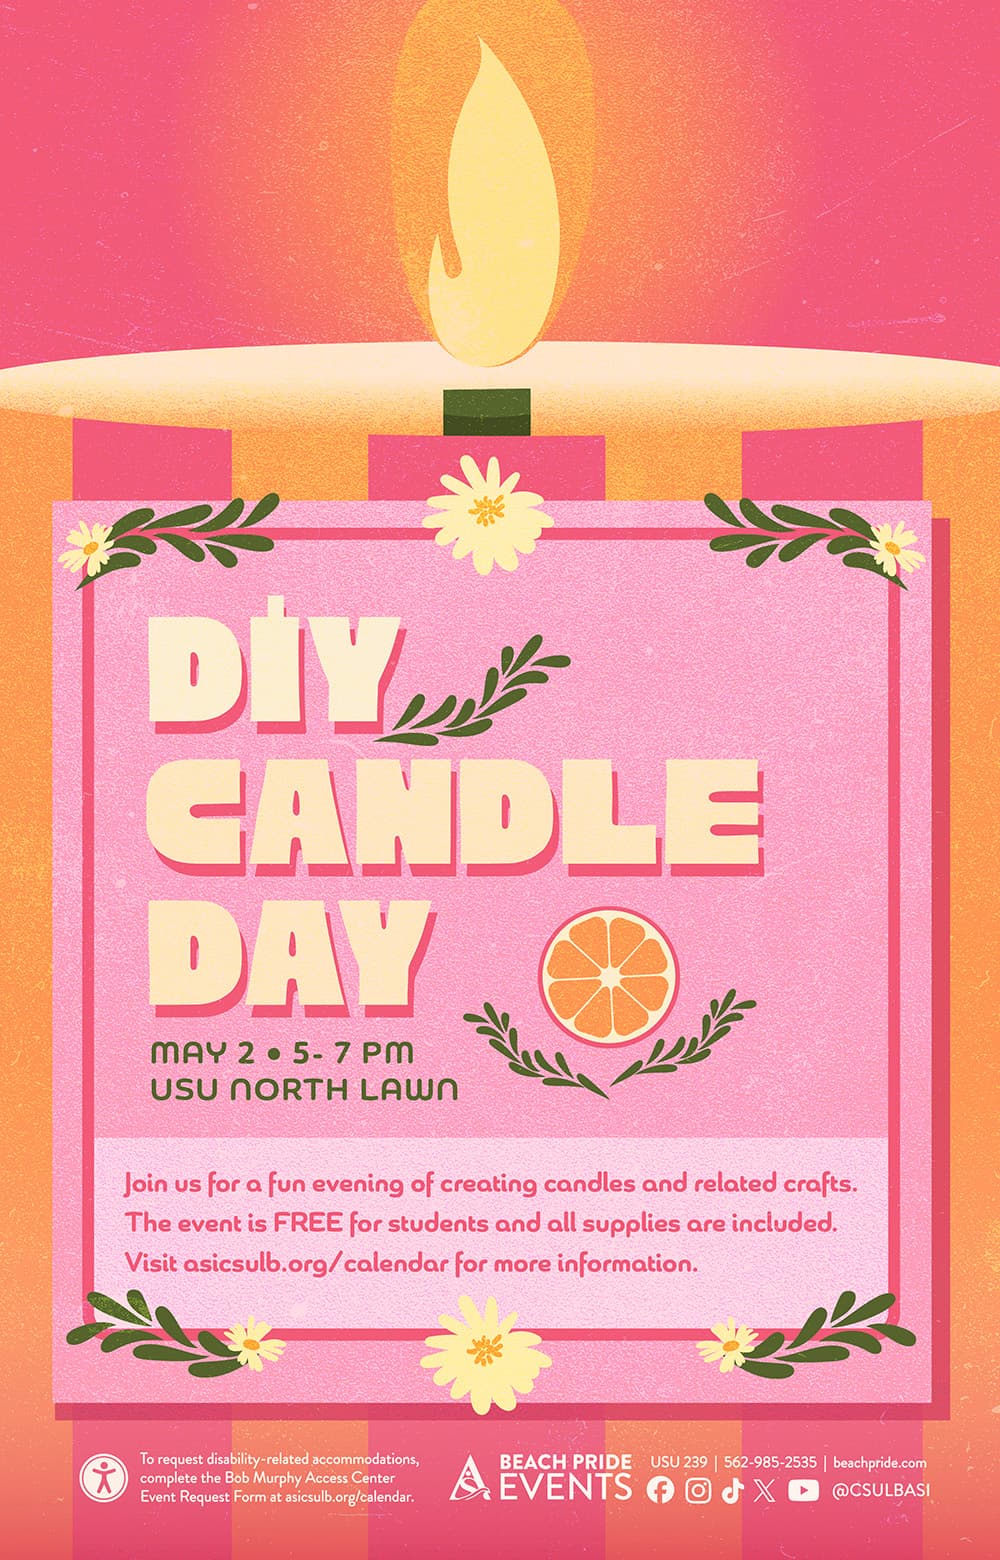 DIY Candle event May 2 from 5-7pm on North Lawn